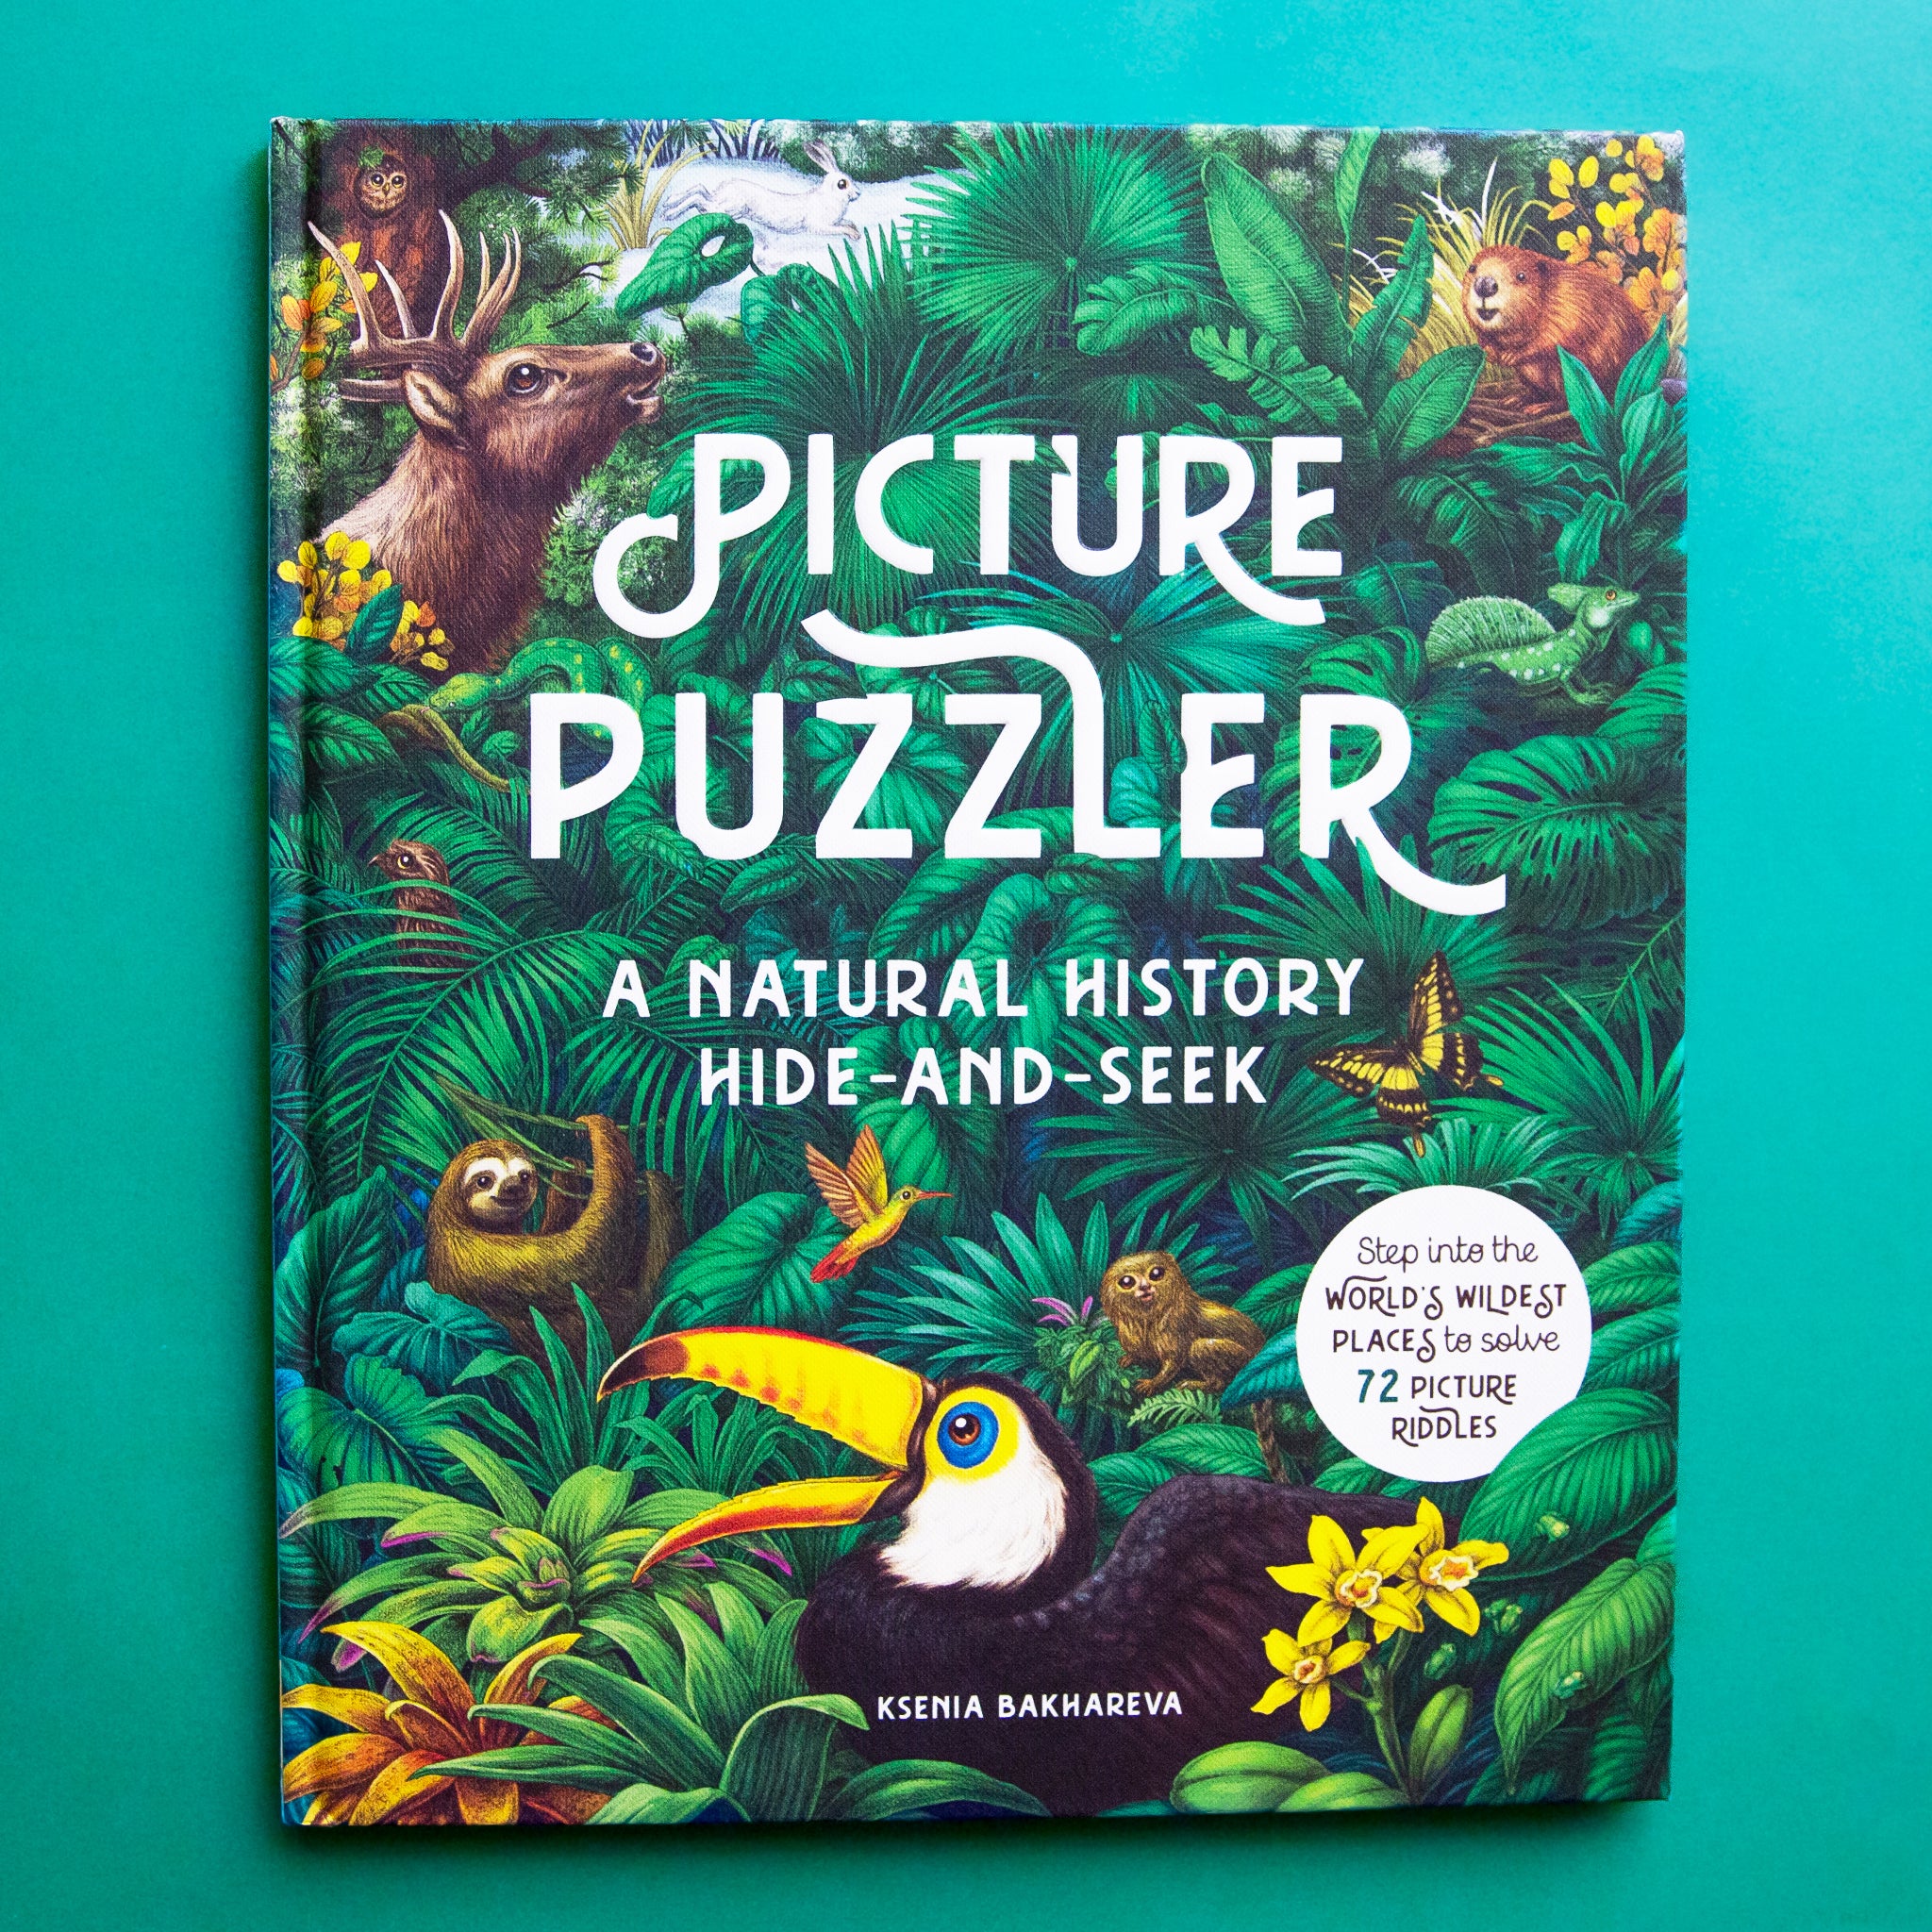 On a teal background is a book with a variety of animals and a white title in the center that reads, "Picture Puzzler A Natural History Hide-And-Seek". 